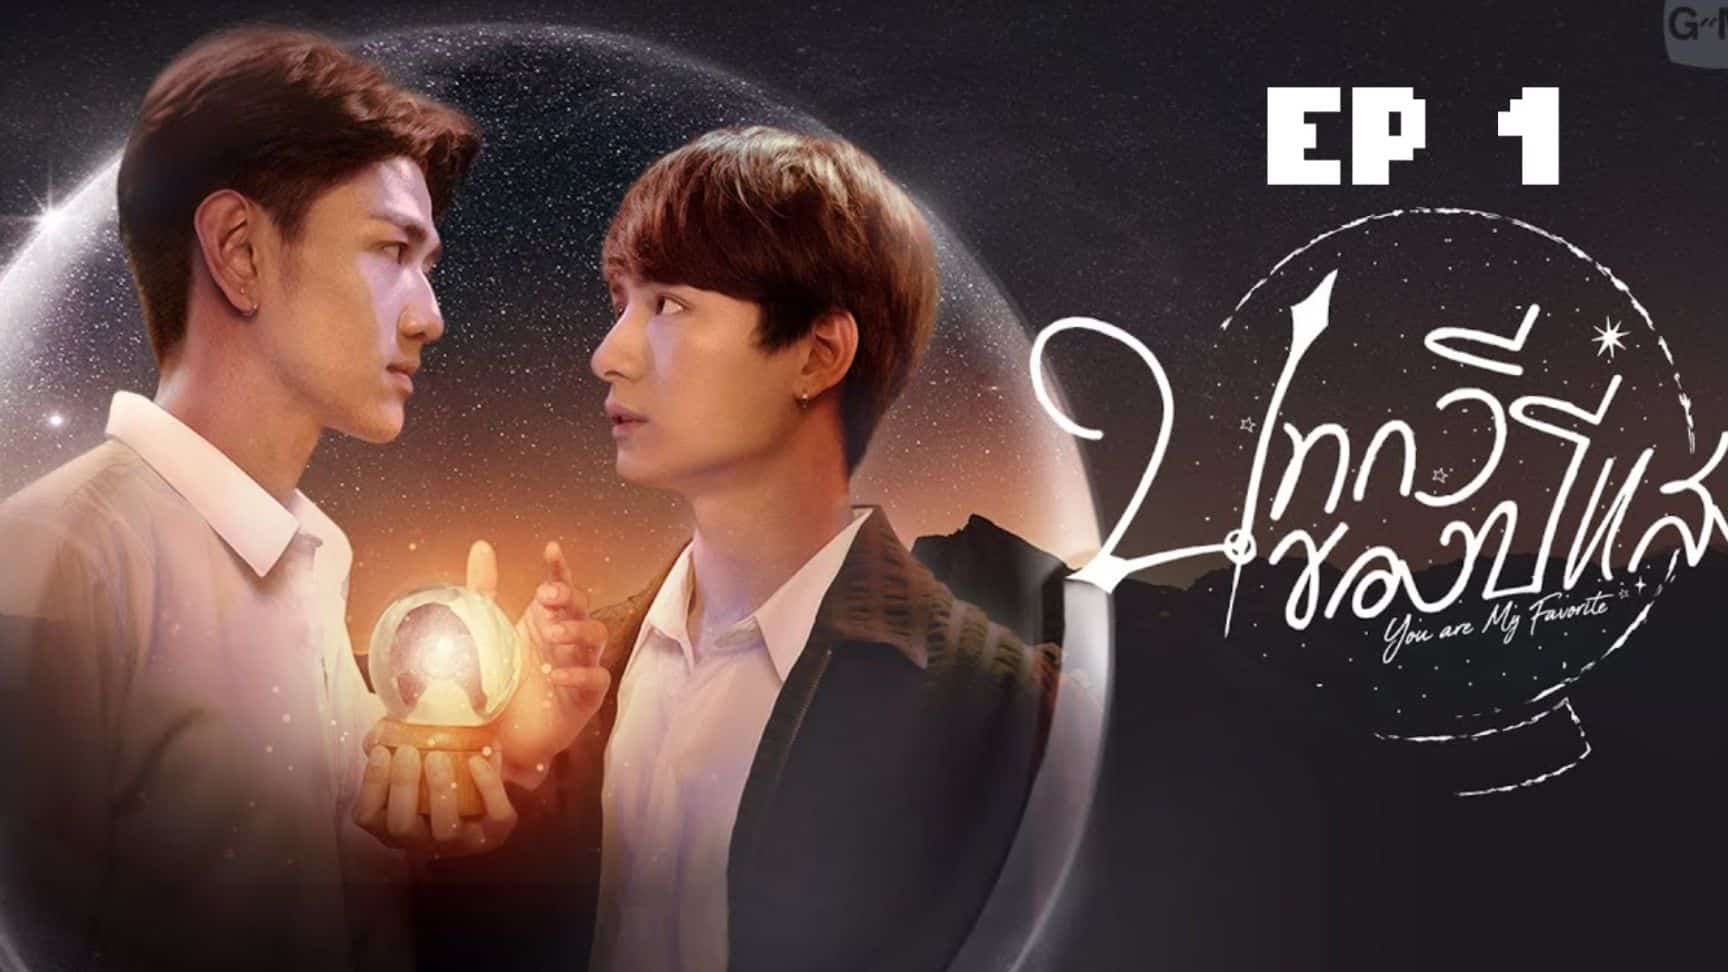 You are My Favorite Episode 12: Release Date and Streaming Guide